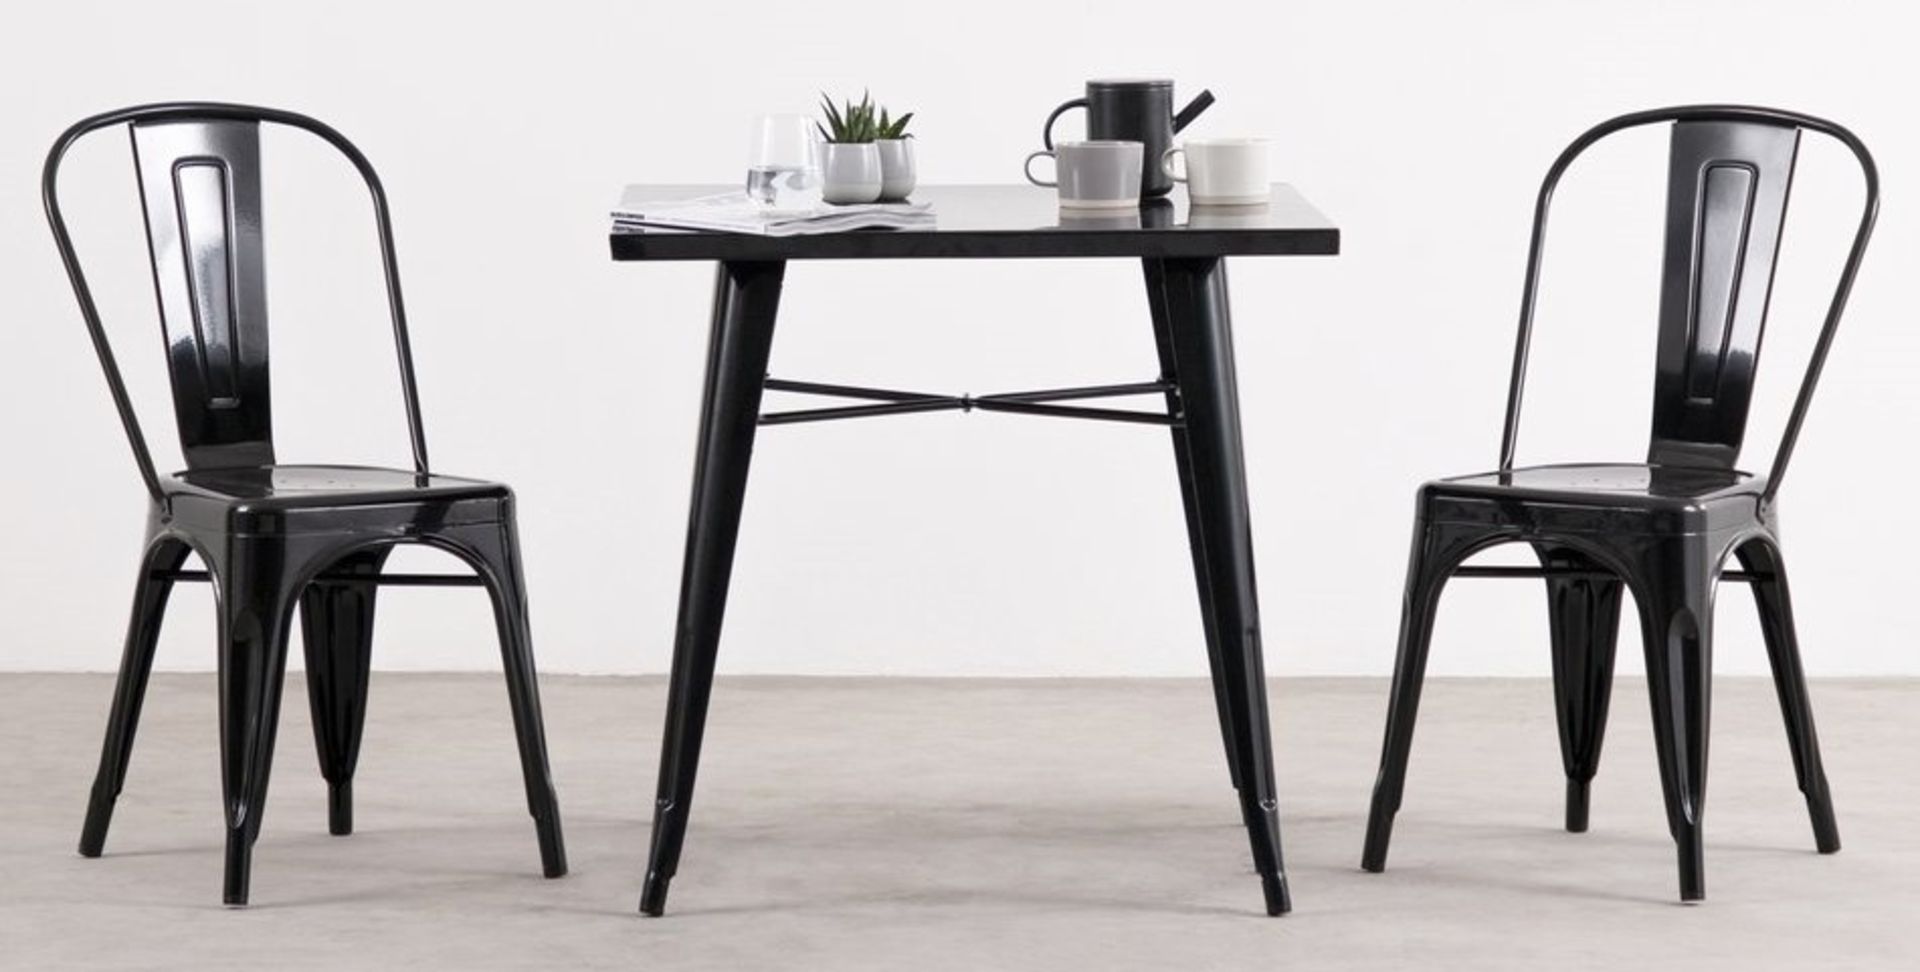 1 x Tolix Industrial Style Outdoor Bistro Table and Chair Set in Black - Includes 1 x Table and 4 - Image 3 of 11